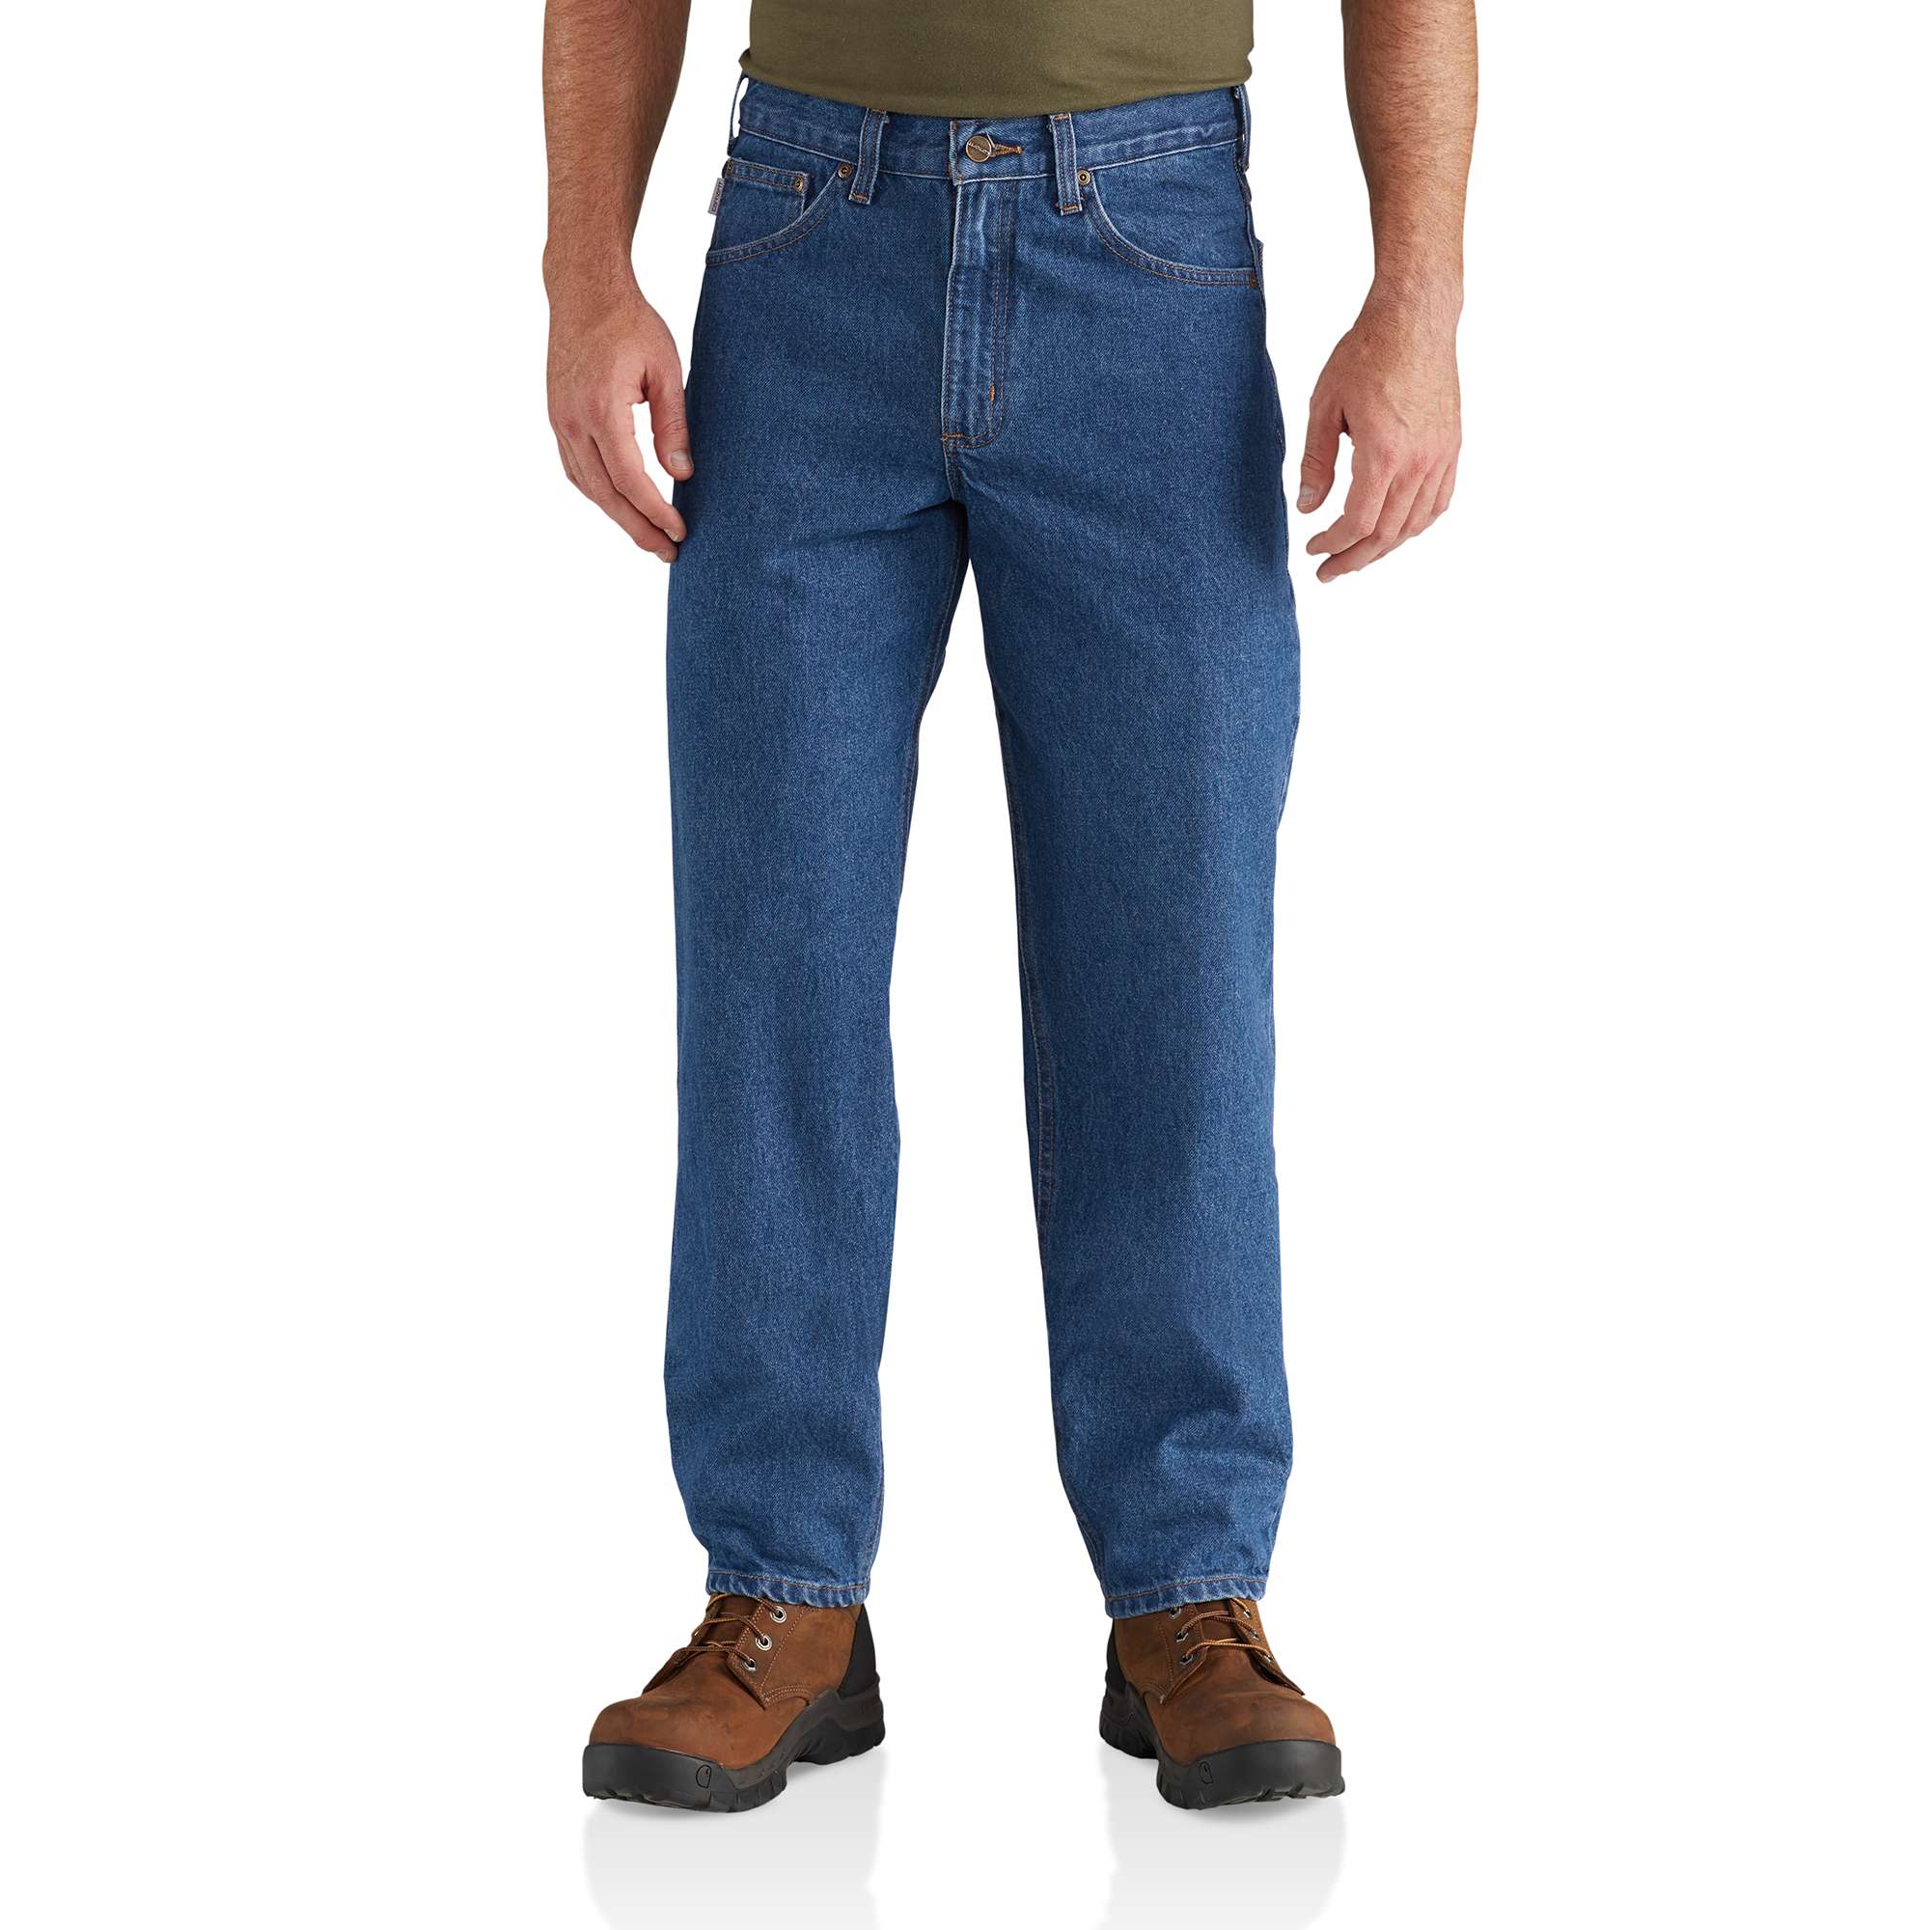 Men’s Relaxed Fit Jean